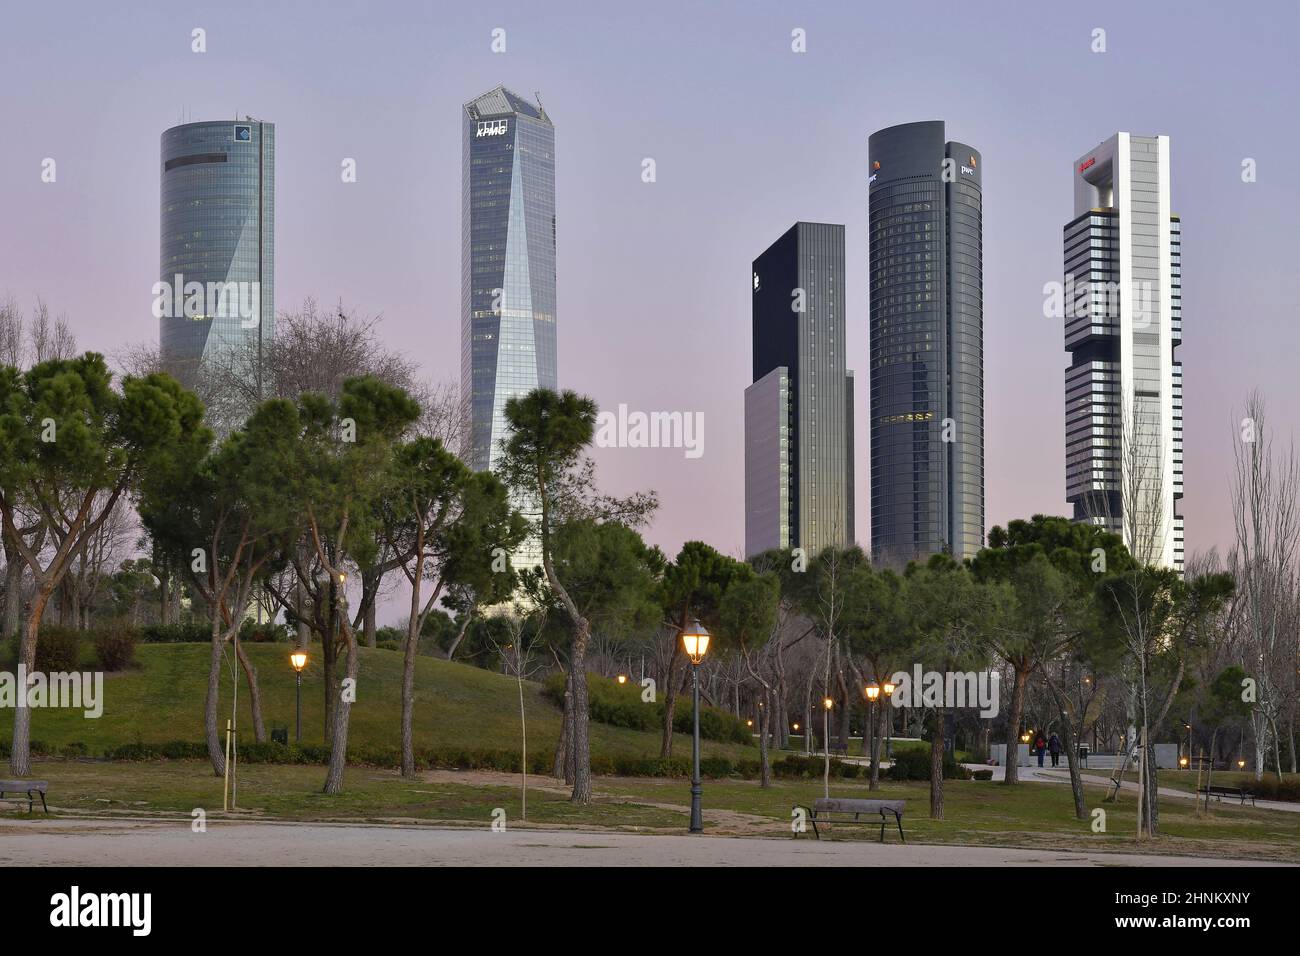 Cuatro Torres  - Four towers business area, modern skyscrapers viewed from Parque Norte urban parkland in Madrid Spain. Stock Photo